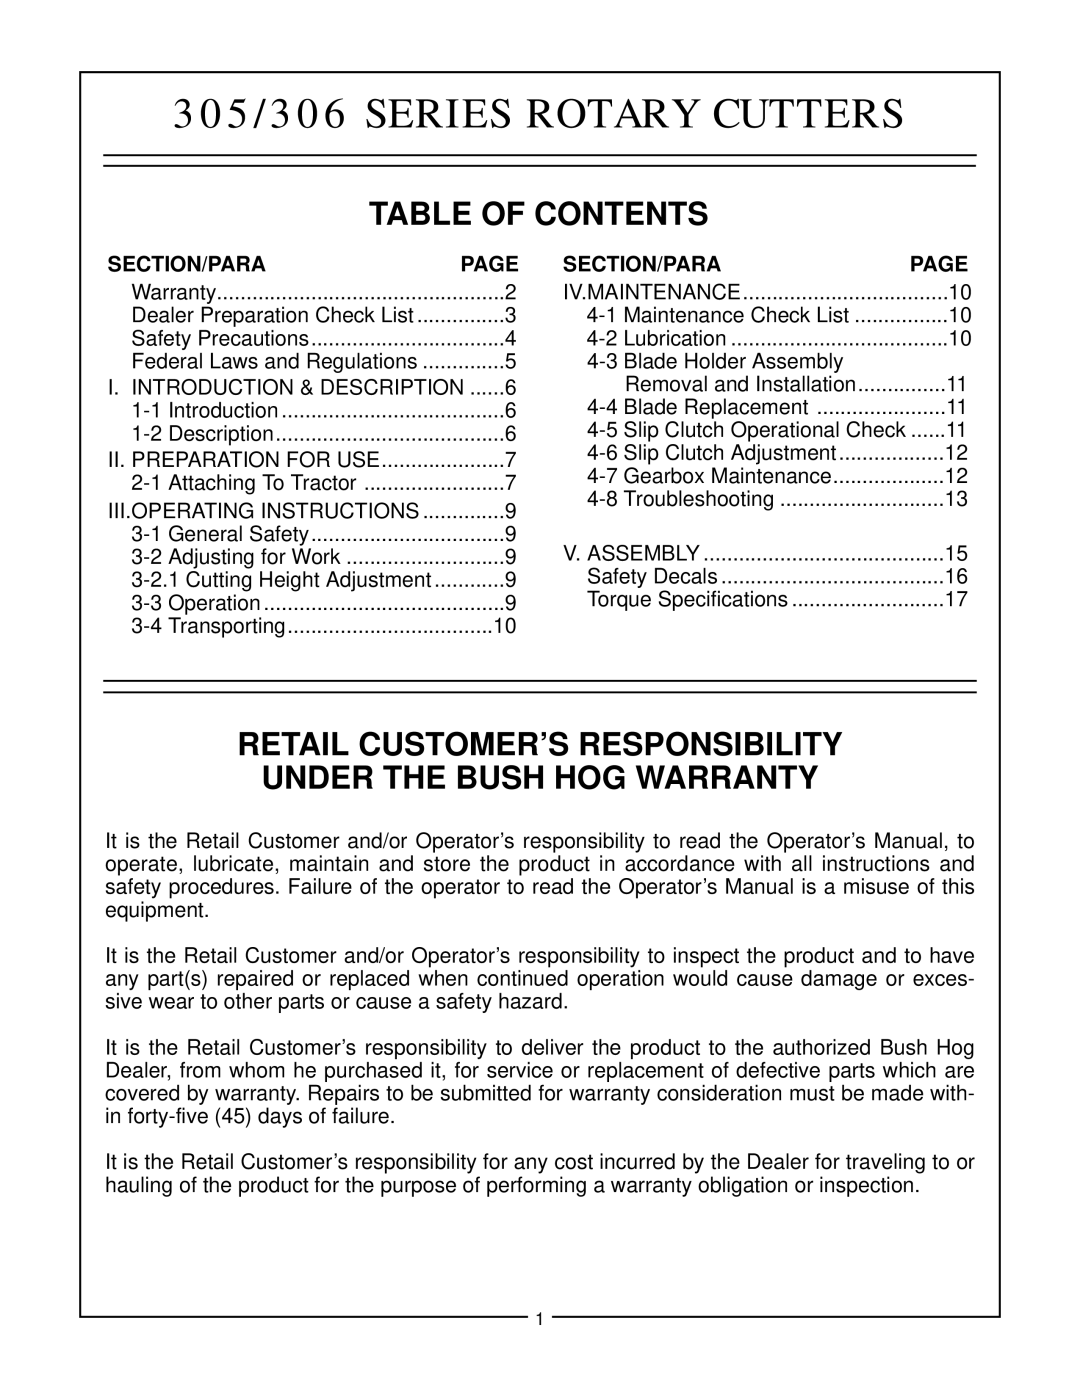 Bush Hog 306, 305 Table Of Contents, Retail Customer’S Responsibility, Under The Bush Hog Warranty, Section/Para, Page 